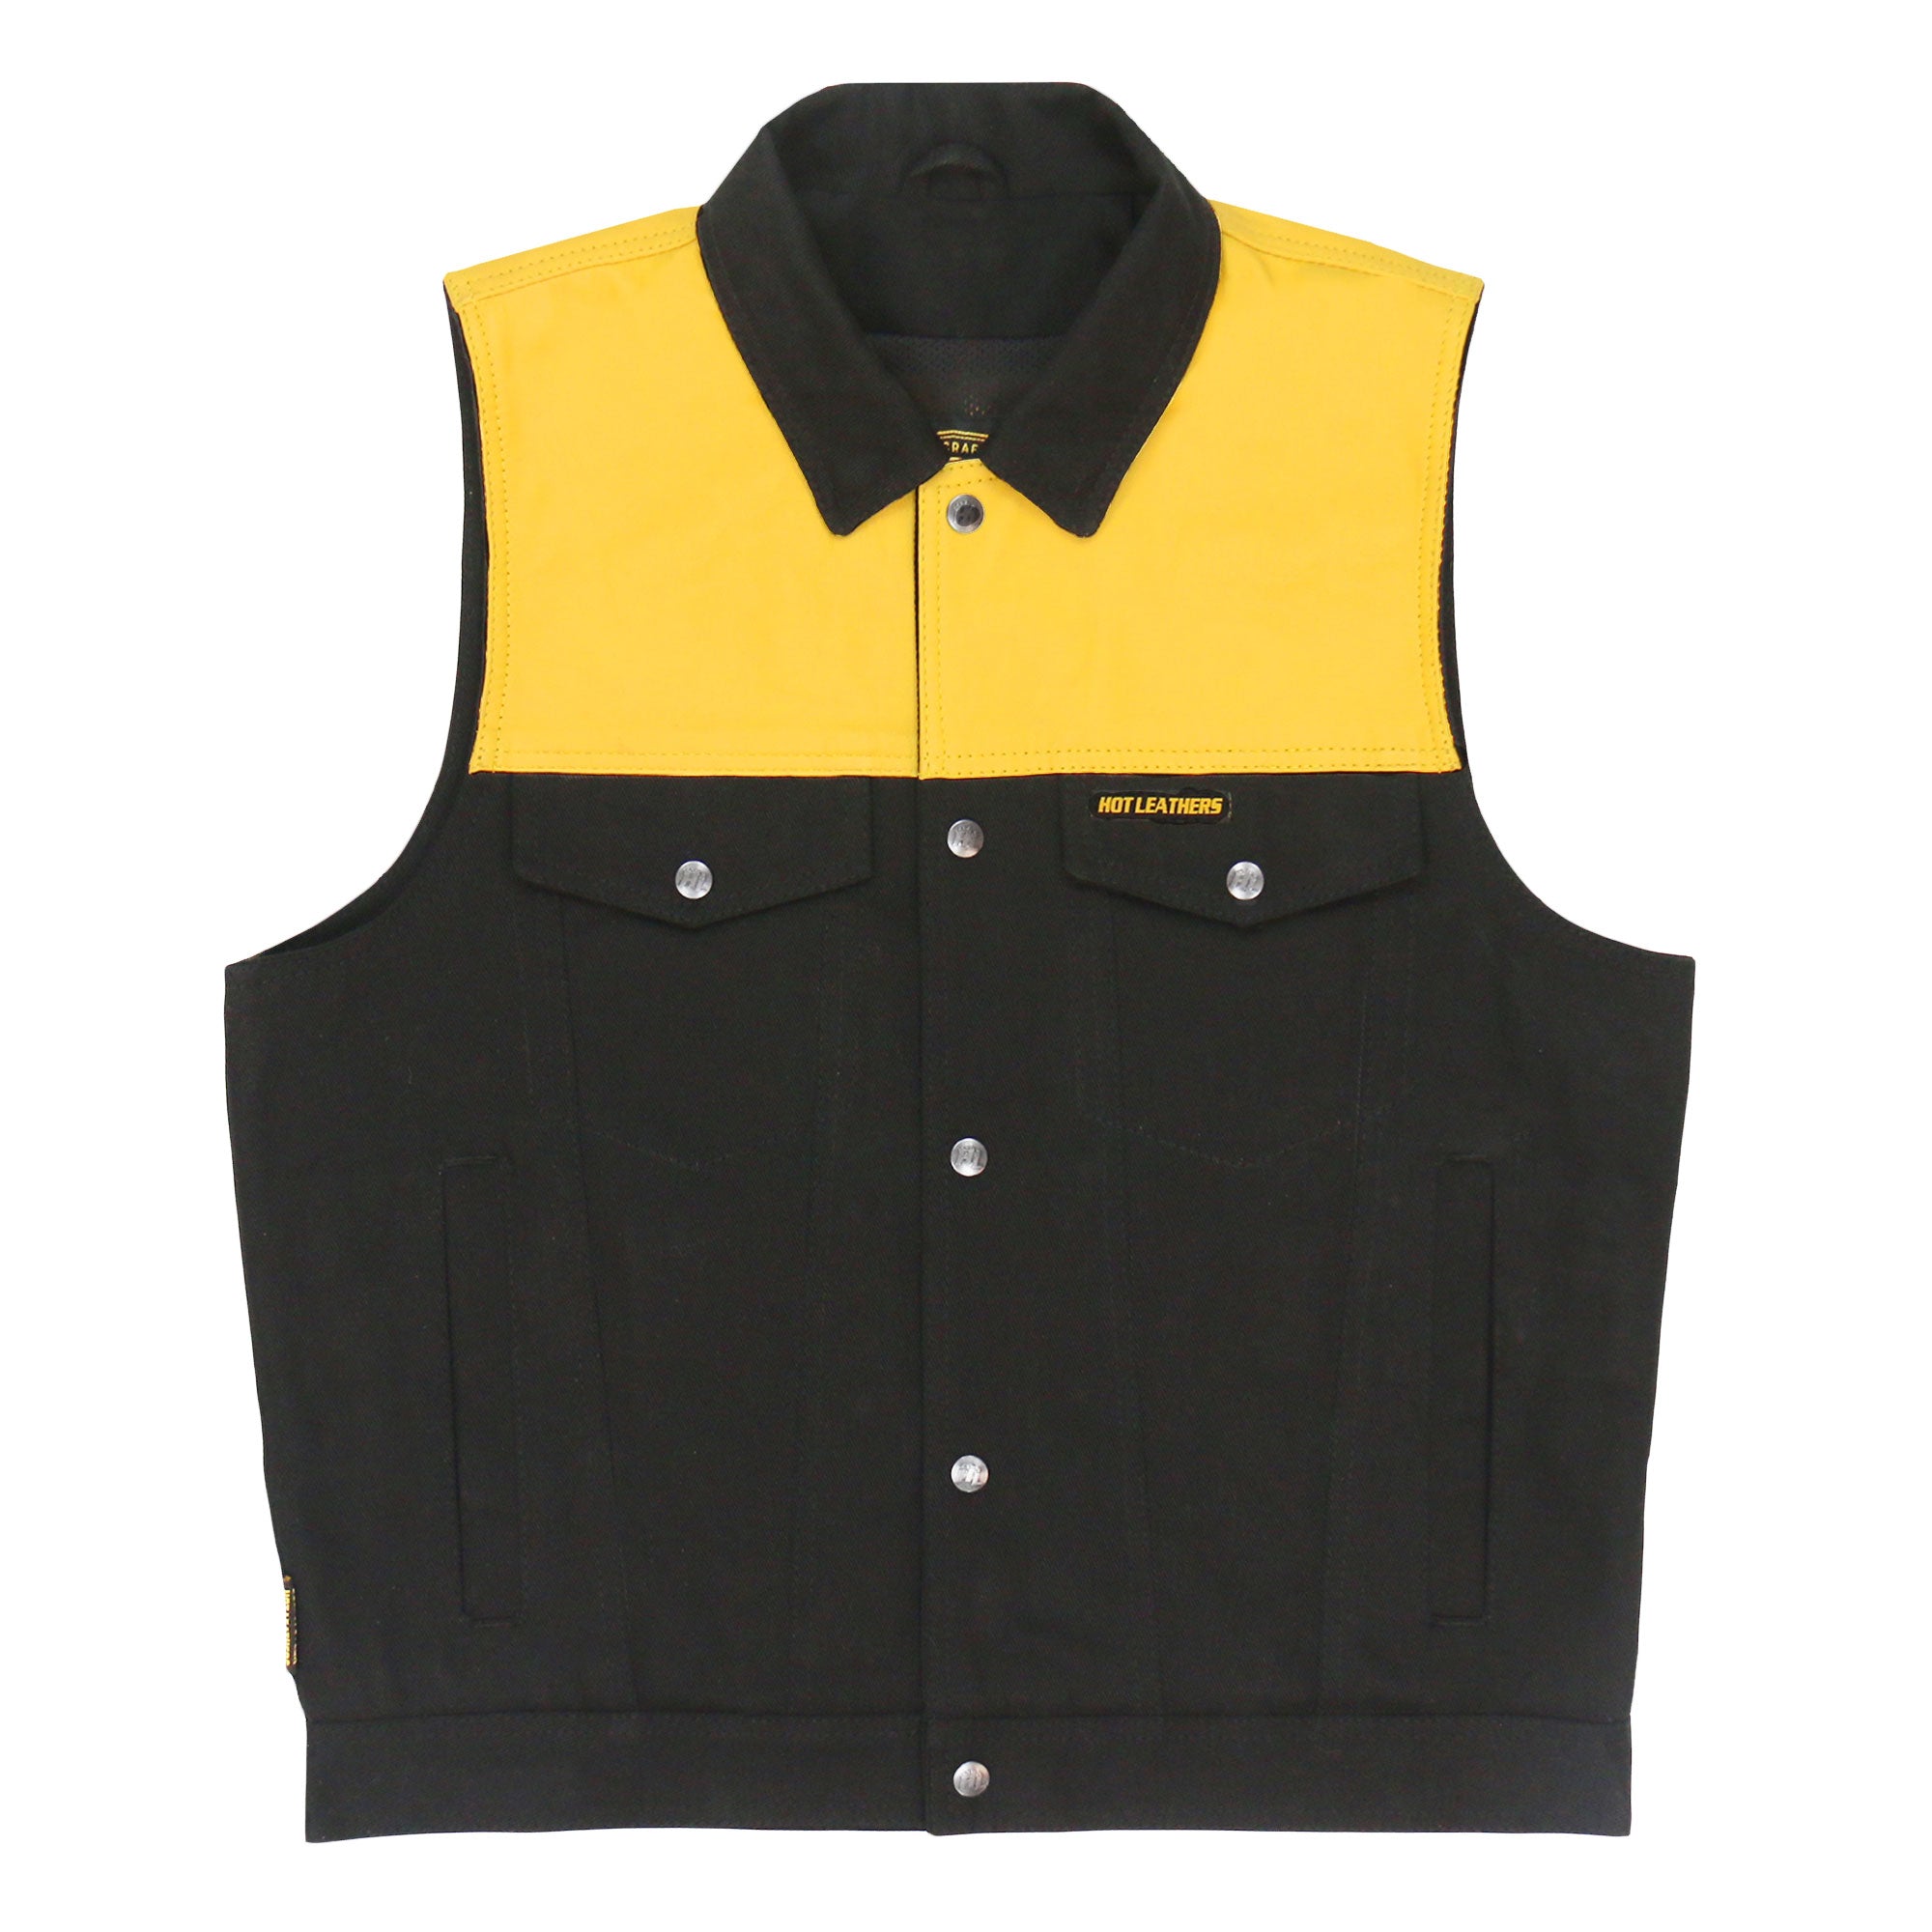 Hot Leathers Men’s Black and Yellow Denim Conceal Carry Vest